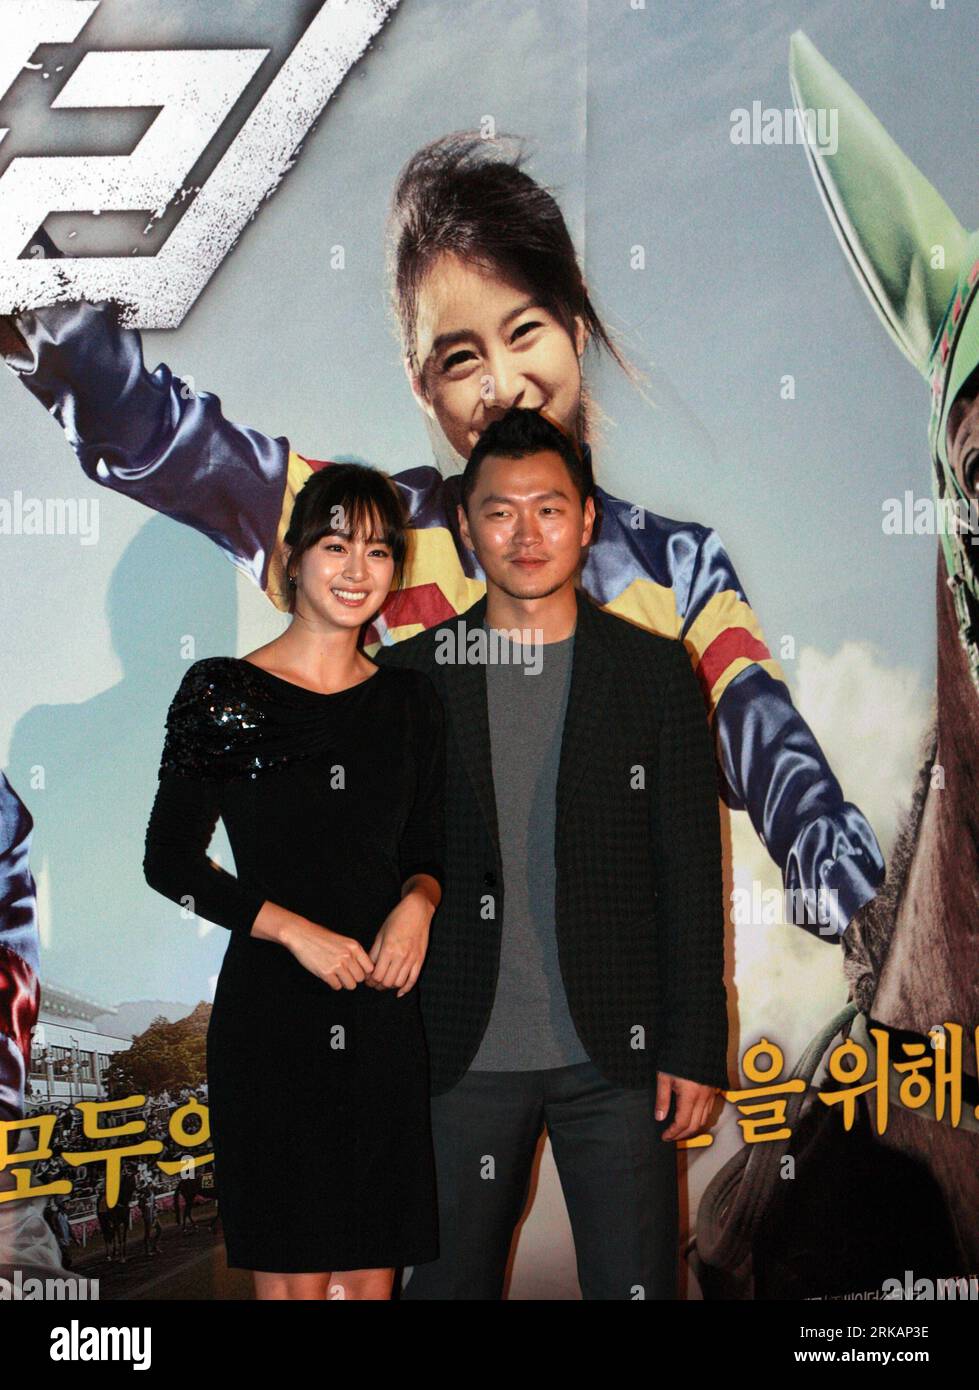 Bildnummer: 54411006  Datum: 07.09.2010  Copyright: imago/Xinhua (100907) -- SEOUL, Sept. 7, 2010 (Xinhua) -- Leading actress Kim Tae Hee (L) and leading actor Yang Dong-Geun of the movie Grand Prix attends the trial show of the movie in Seoul, capital of South Korea, on Sept. 7, 2010. (Xinhua/He Lulu) (zcq) SOUTH KOREA-SEOUL-MOVIE PUBLICATIONxNOTxINxCHN People Film kbdig xcb 2010 hoch     Bildnummer 54411006 Date 07 09 2010 Copyright Imago XINHUA  Seoul Sept 7 2010 XINHUA Leading actress Kim Tae Hee l and Leading Actor Yang Dong Geun of The Movie Grand Prix Attends The Trial Show of The Movie Stock Photo